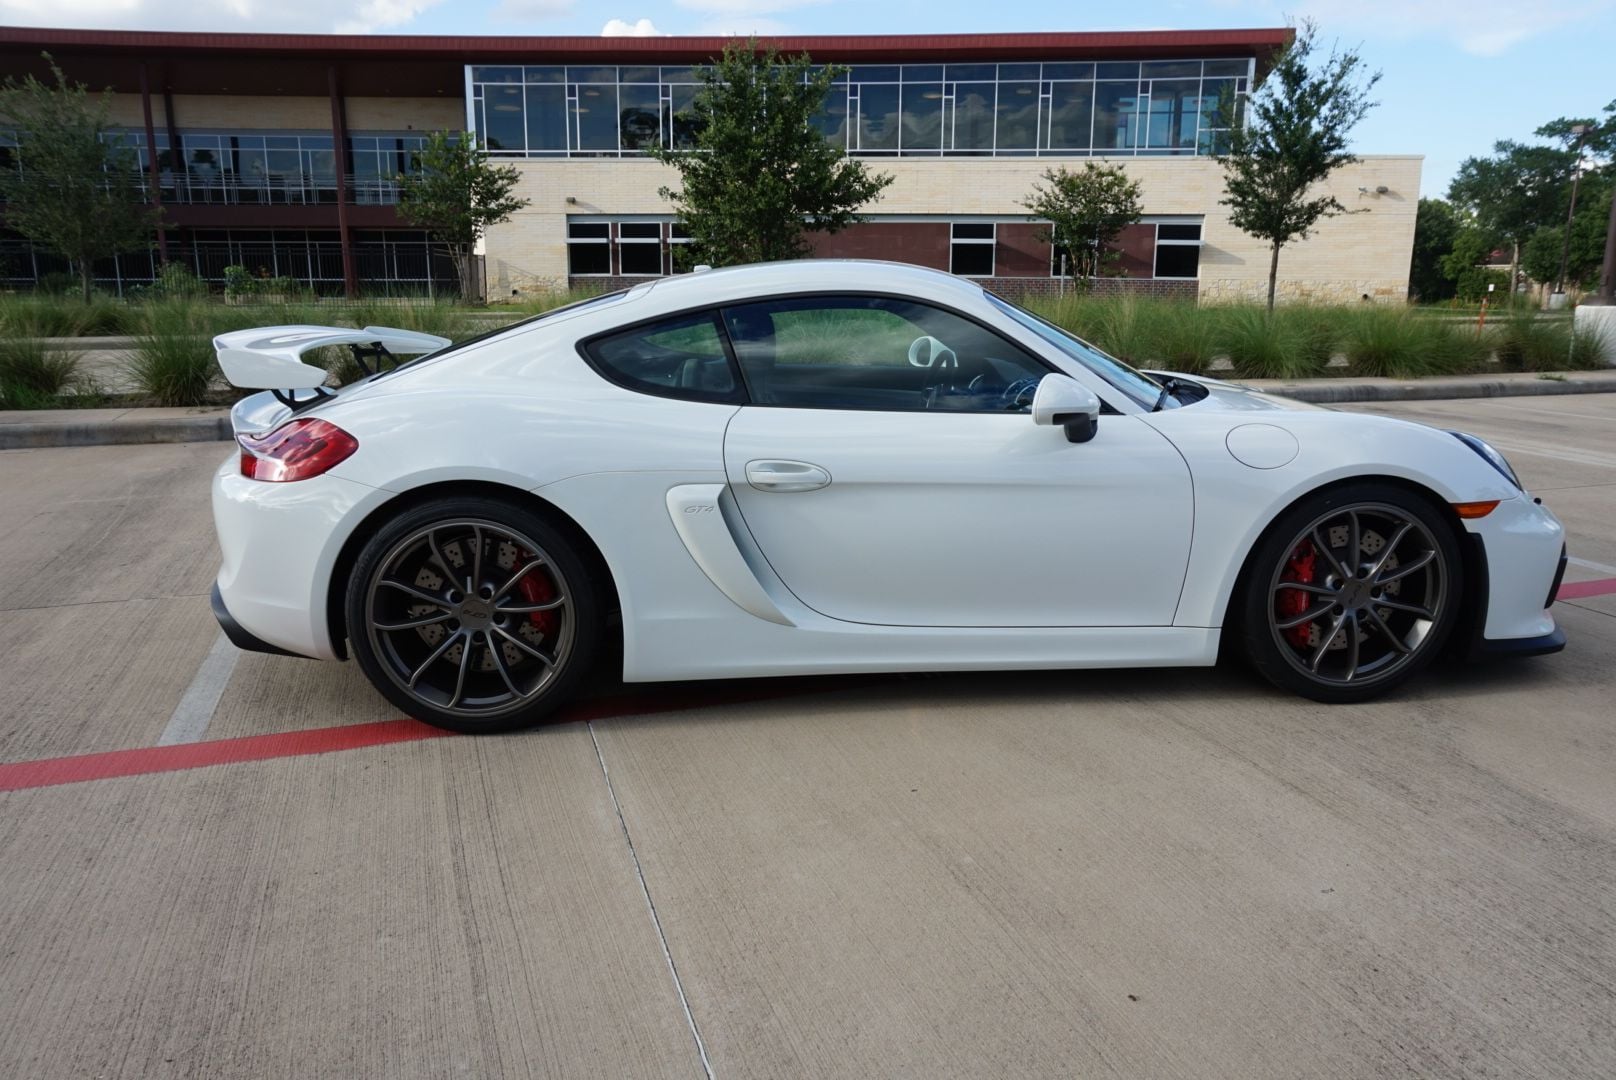 2016 Porsche Cayman GT4 - 2016 Cayman GT4, white, low mileage, no mods, warranty, located in Houston, TX - Used - VIN WP0AC2A85GK192476 - 4,940 Miles - 6 cyl - 2WD - Manual - Coupe - White - Houston, TX 77024, United States